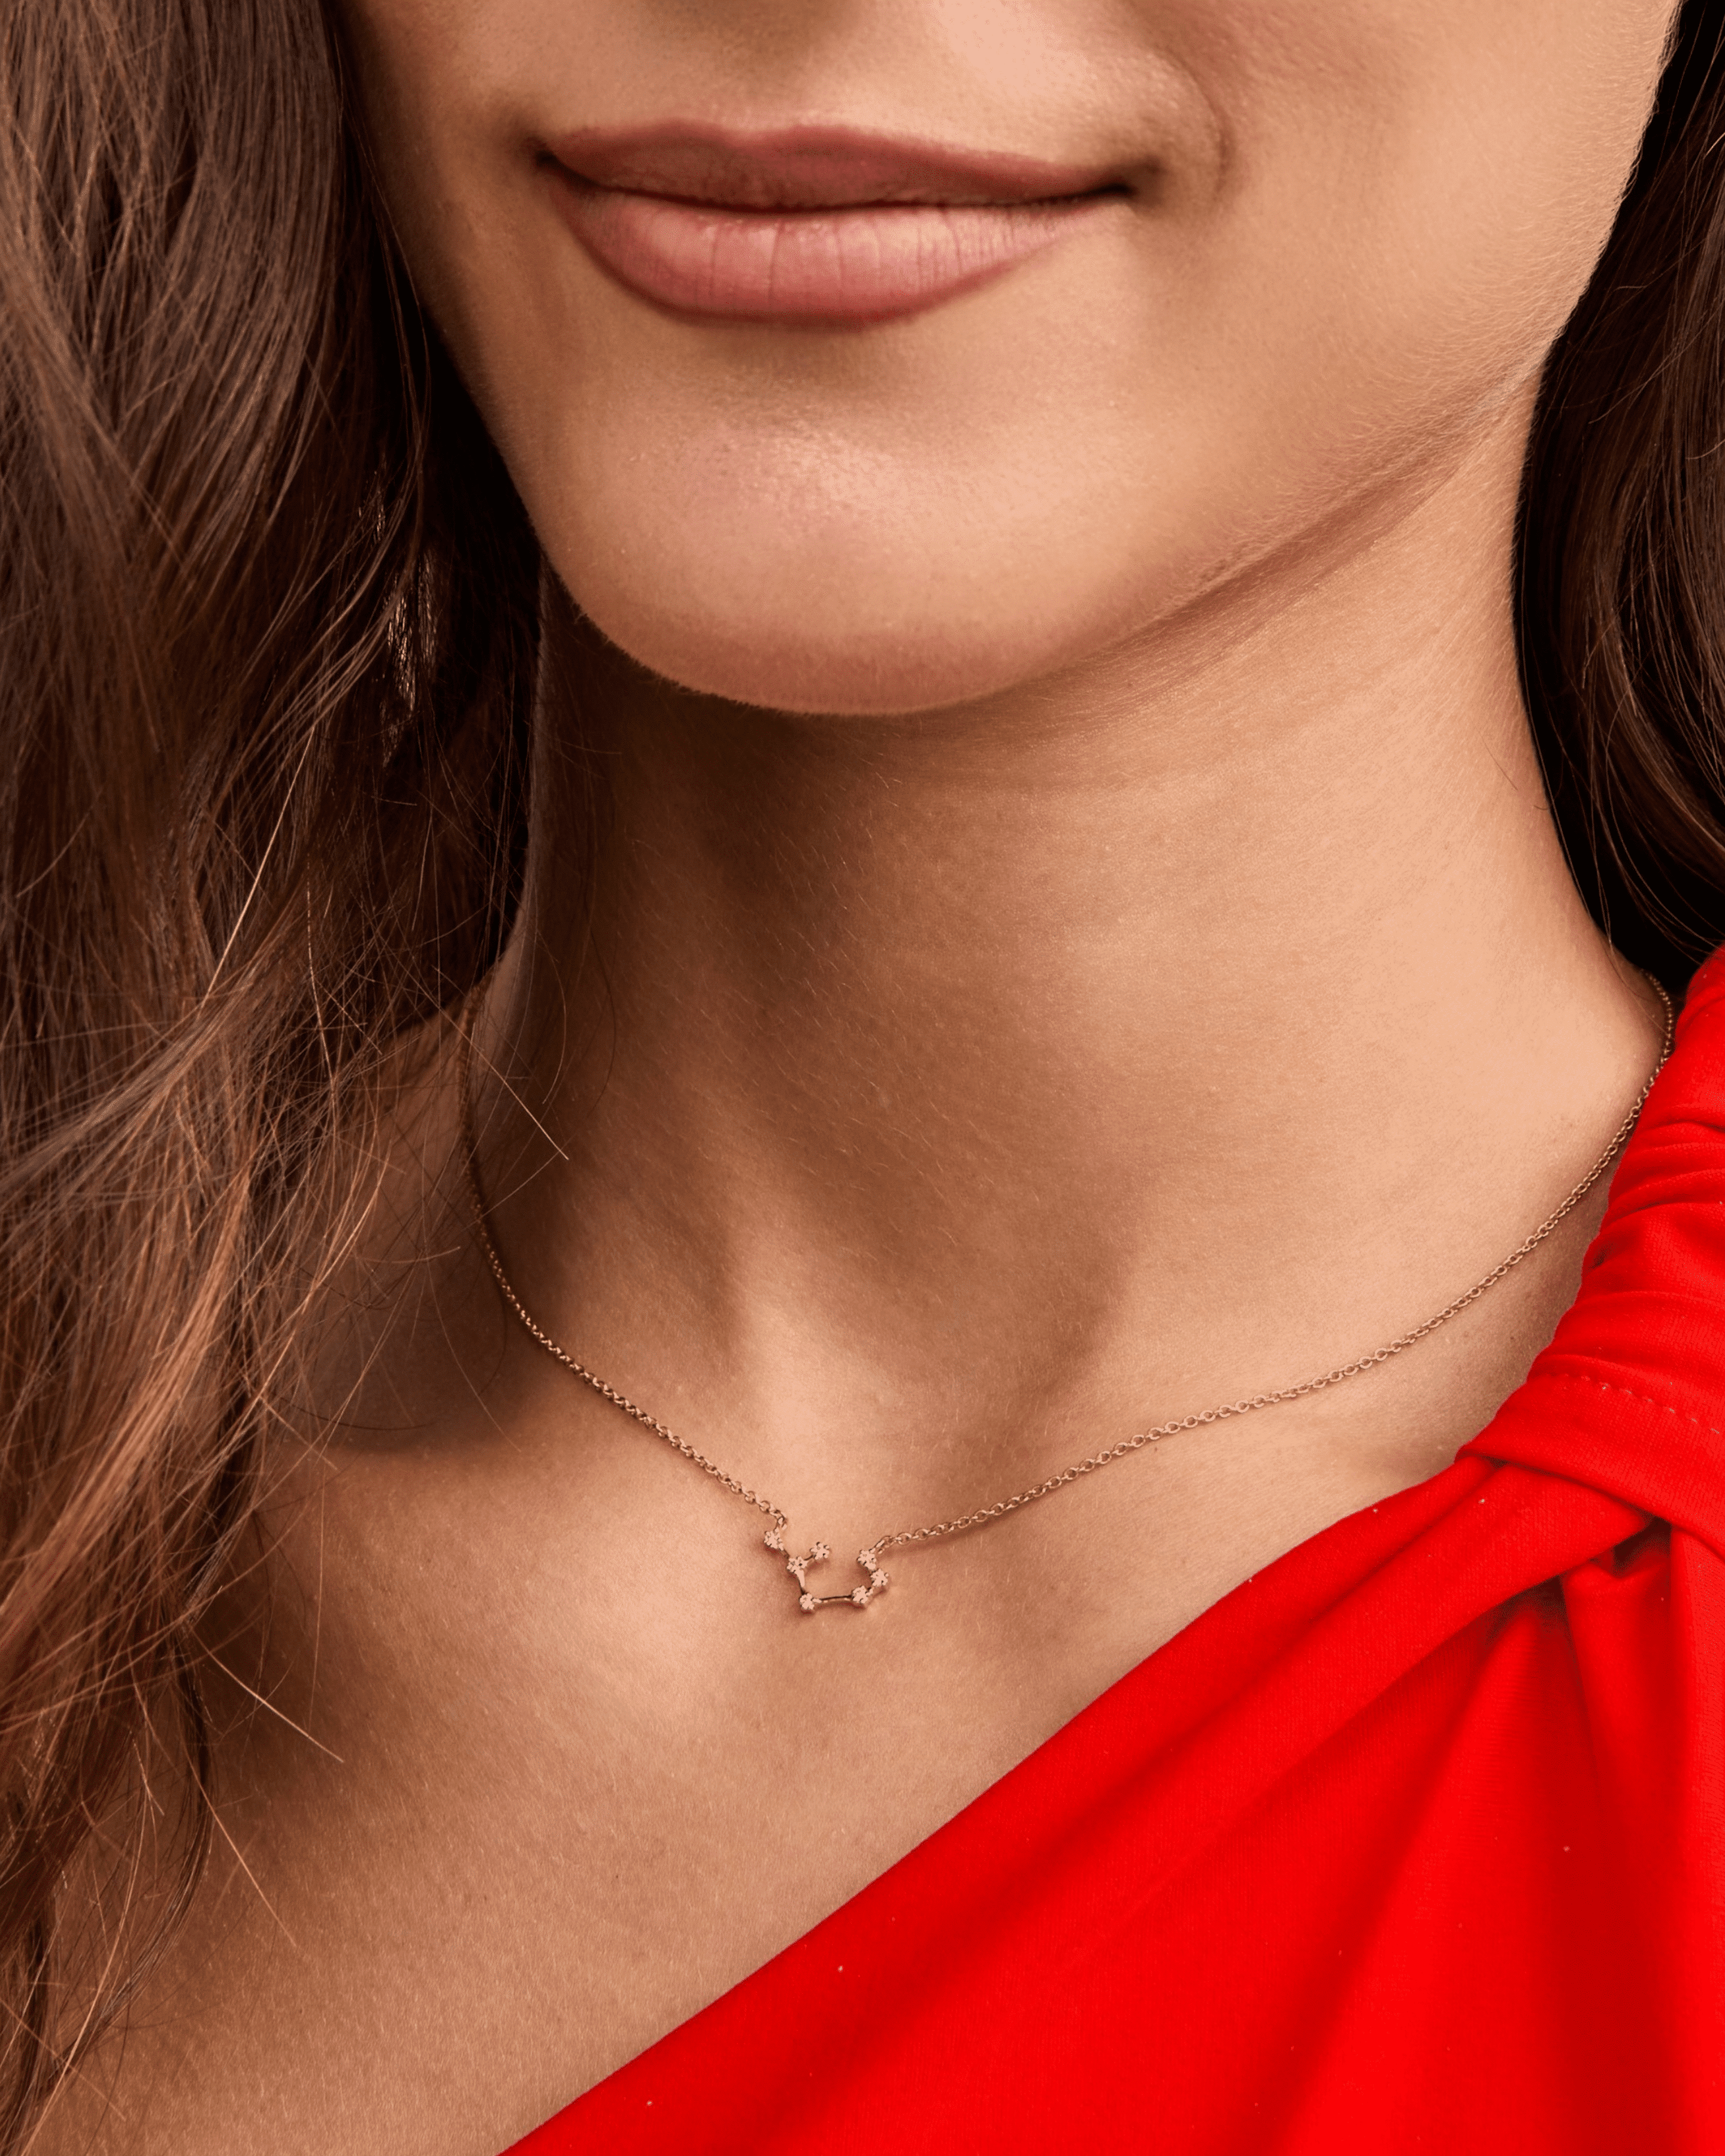 Single Constellation Necklace with Diamonds - 18K Gold Vermeil Necklaces magal-dev 